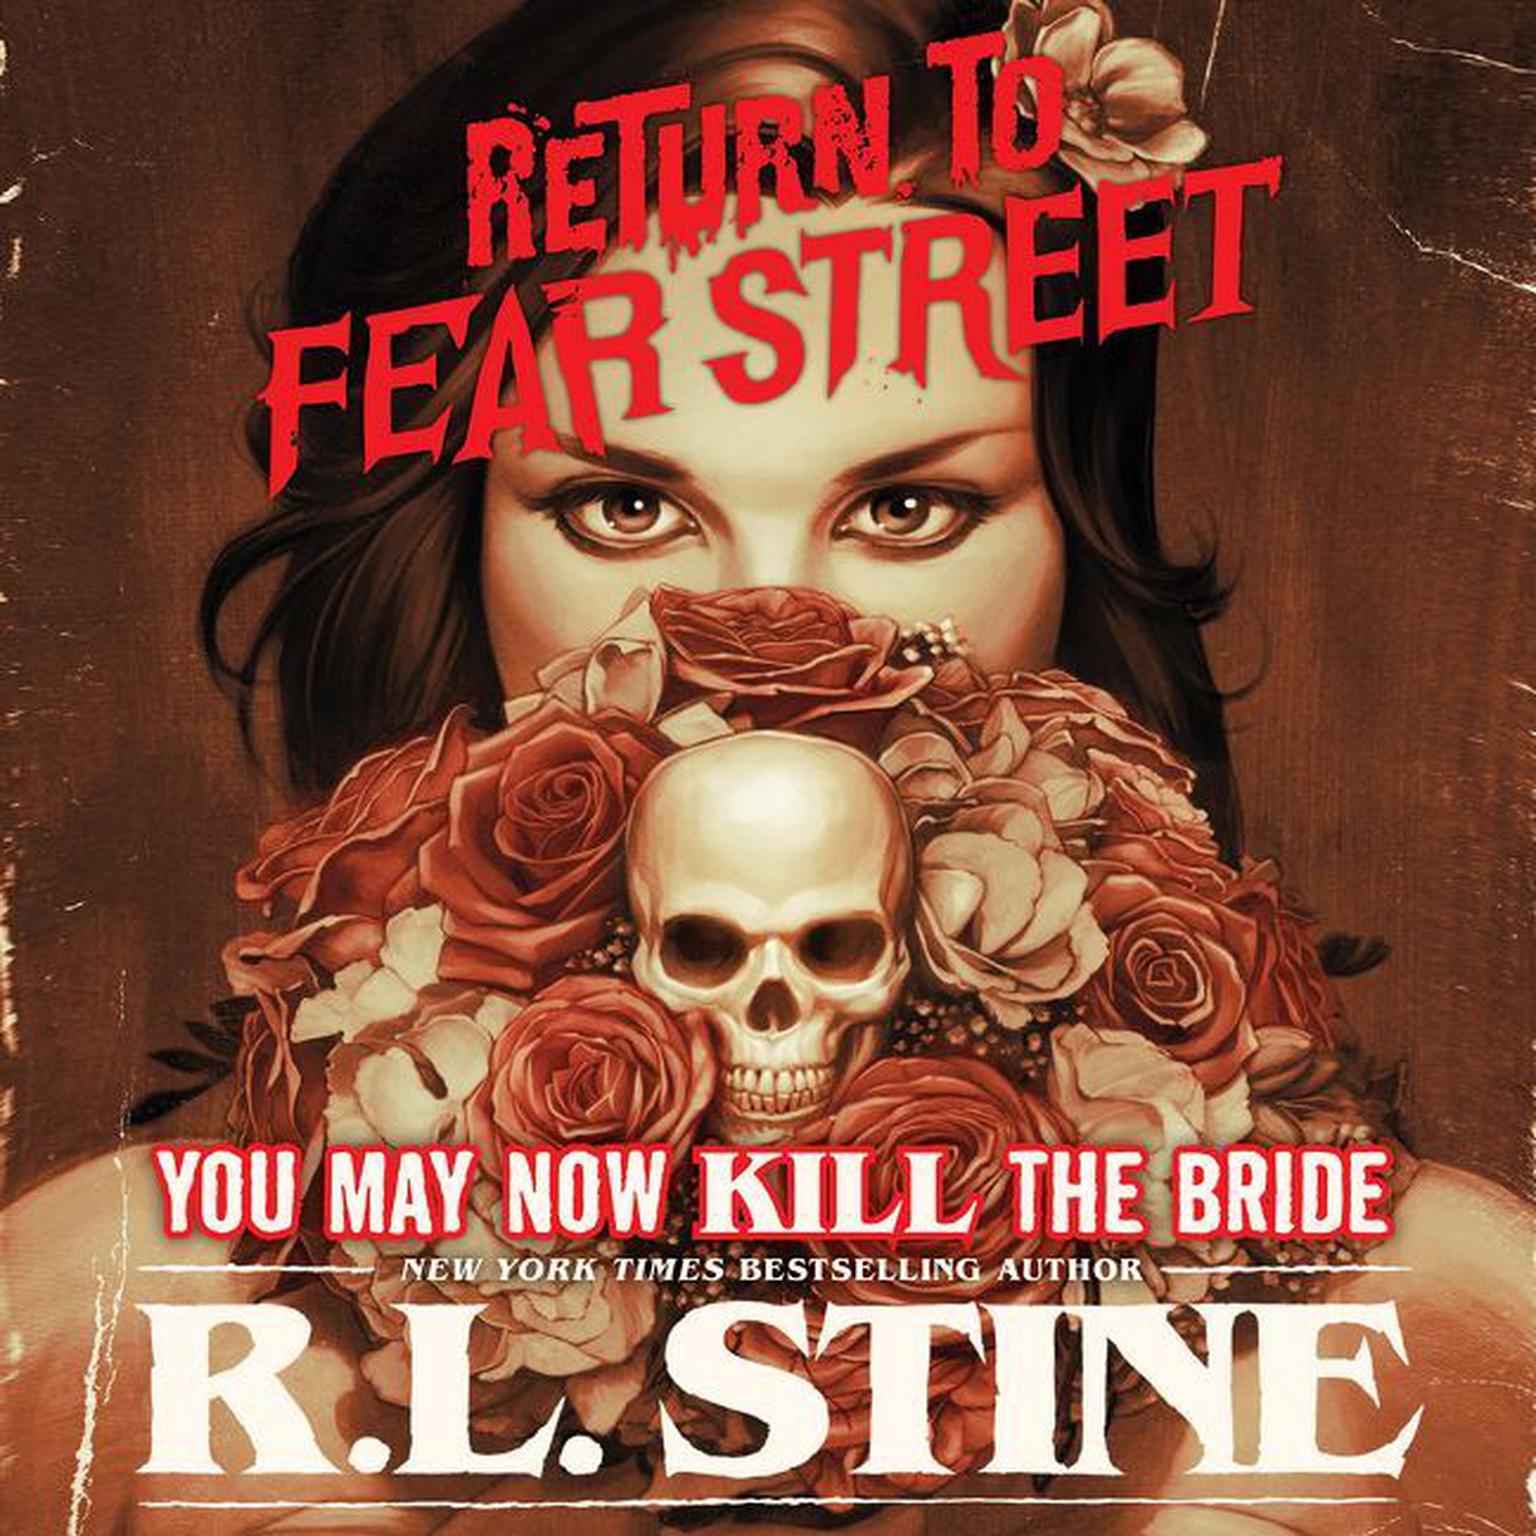 You May Now Kill the Bride: Return to Fear Street, Book 1 Audiobook, by R. L. Stine